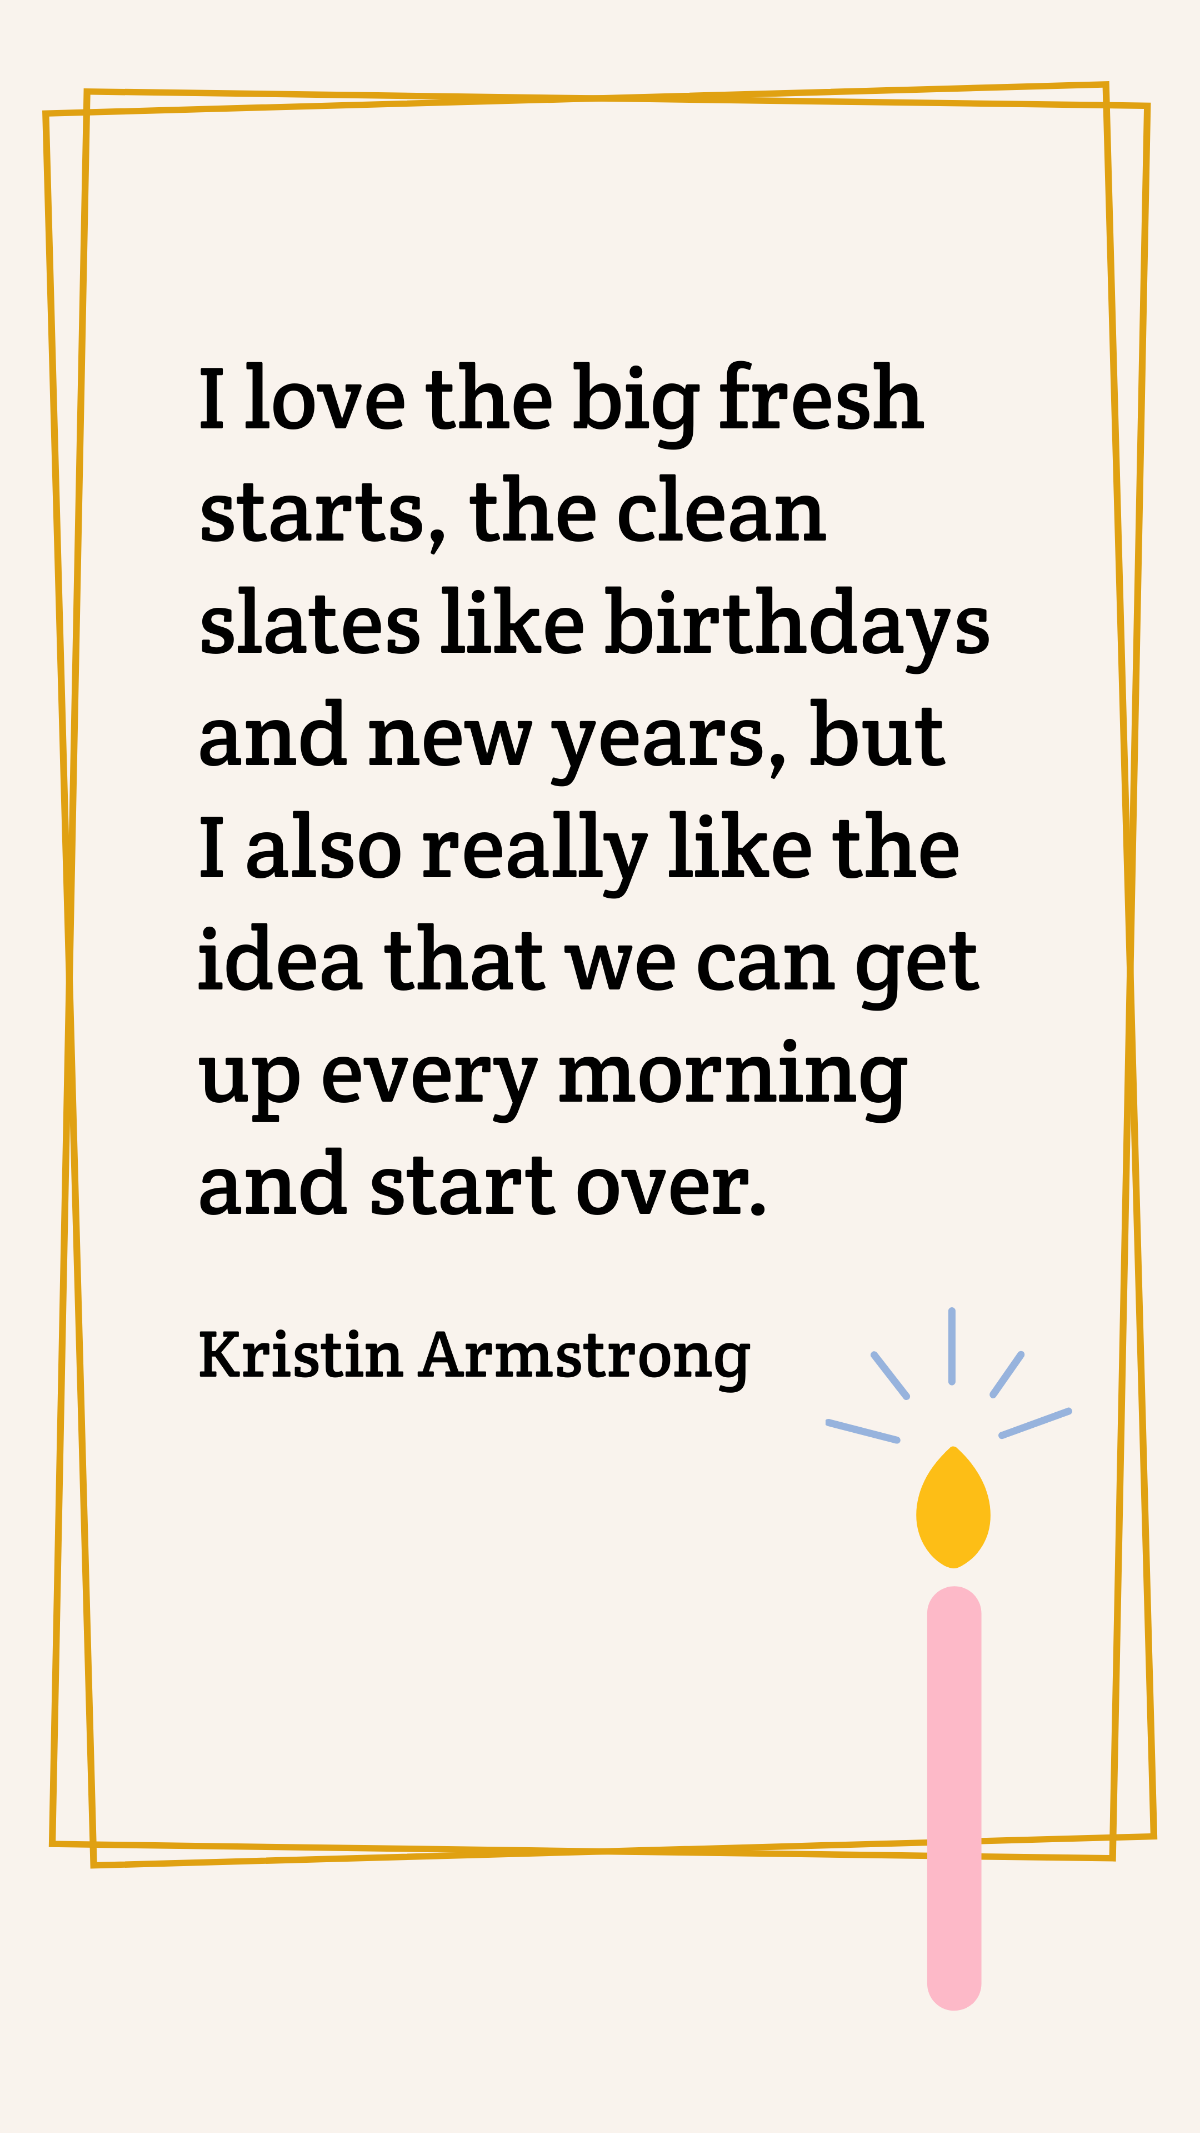 Kristin Armstrong - I love the big fresh starts, the clean slates like birthdays and new years, but I also really like the idea that we can get up every morning and start over. Template